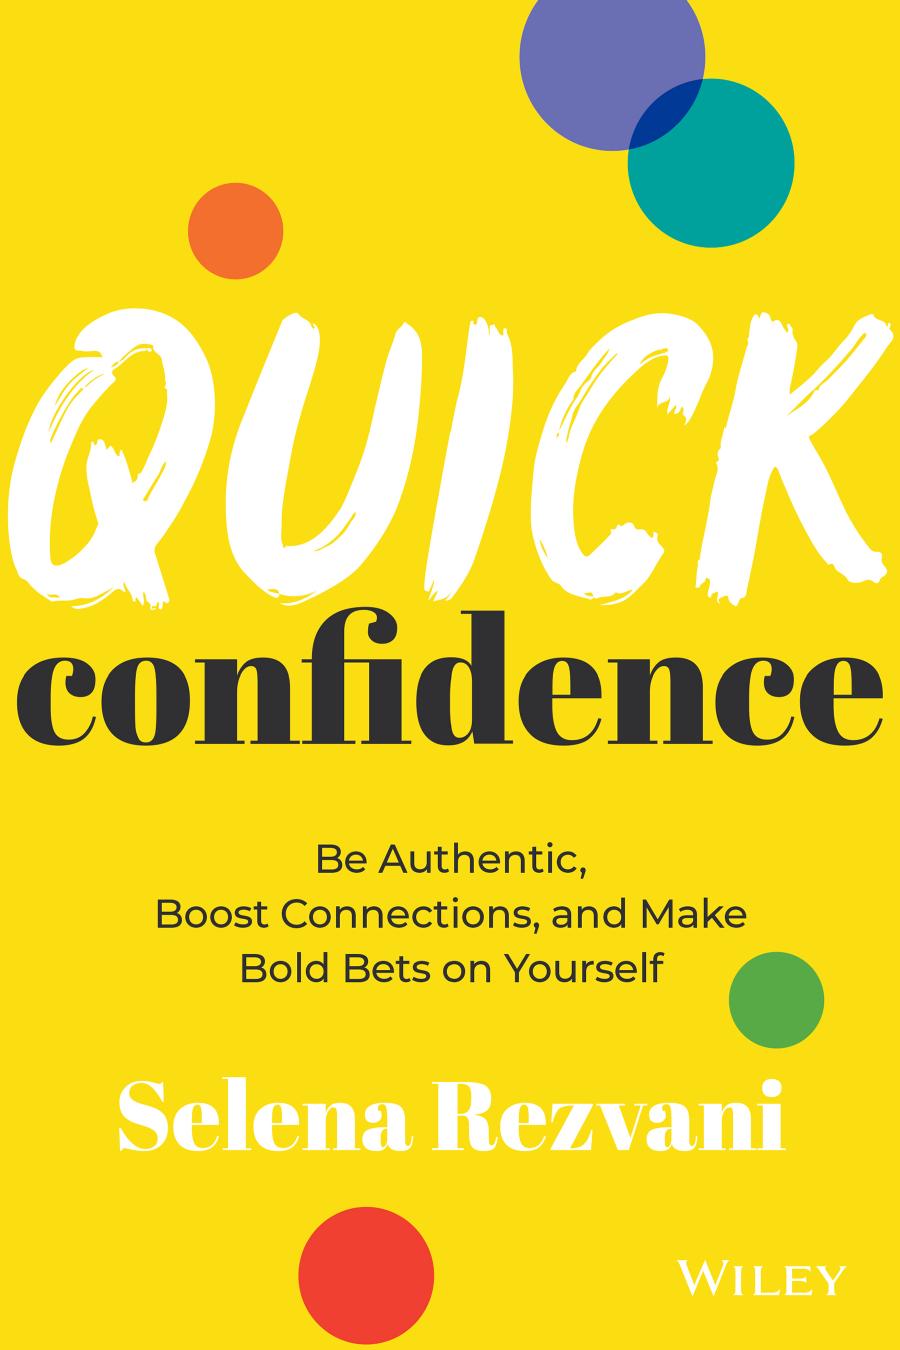 Quick Confidence: Be Authentic, Boost Connections, and Make Bold Bets on Yourself